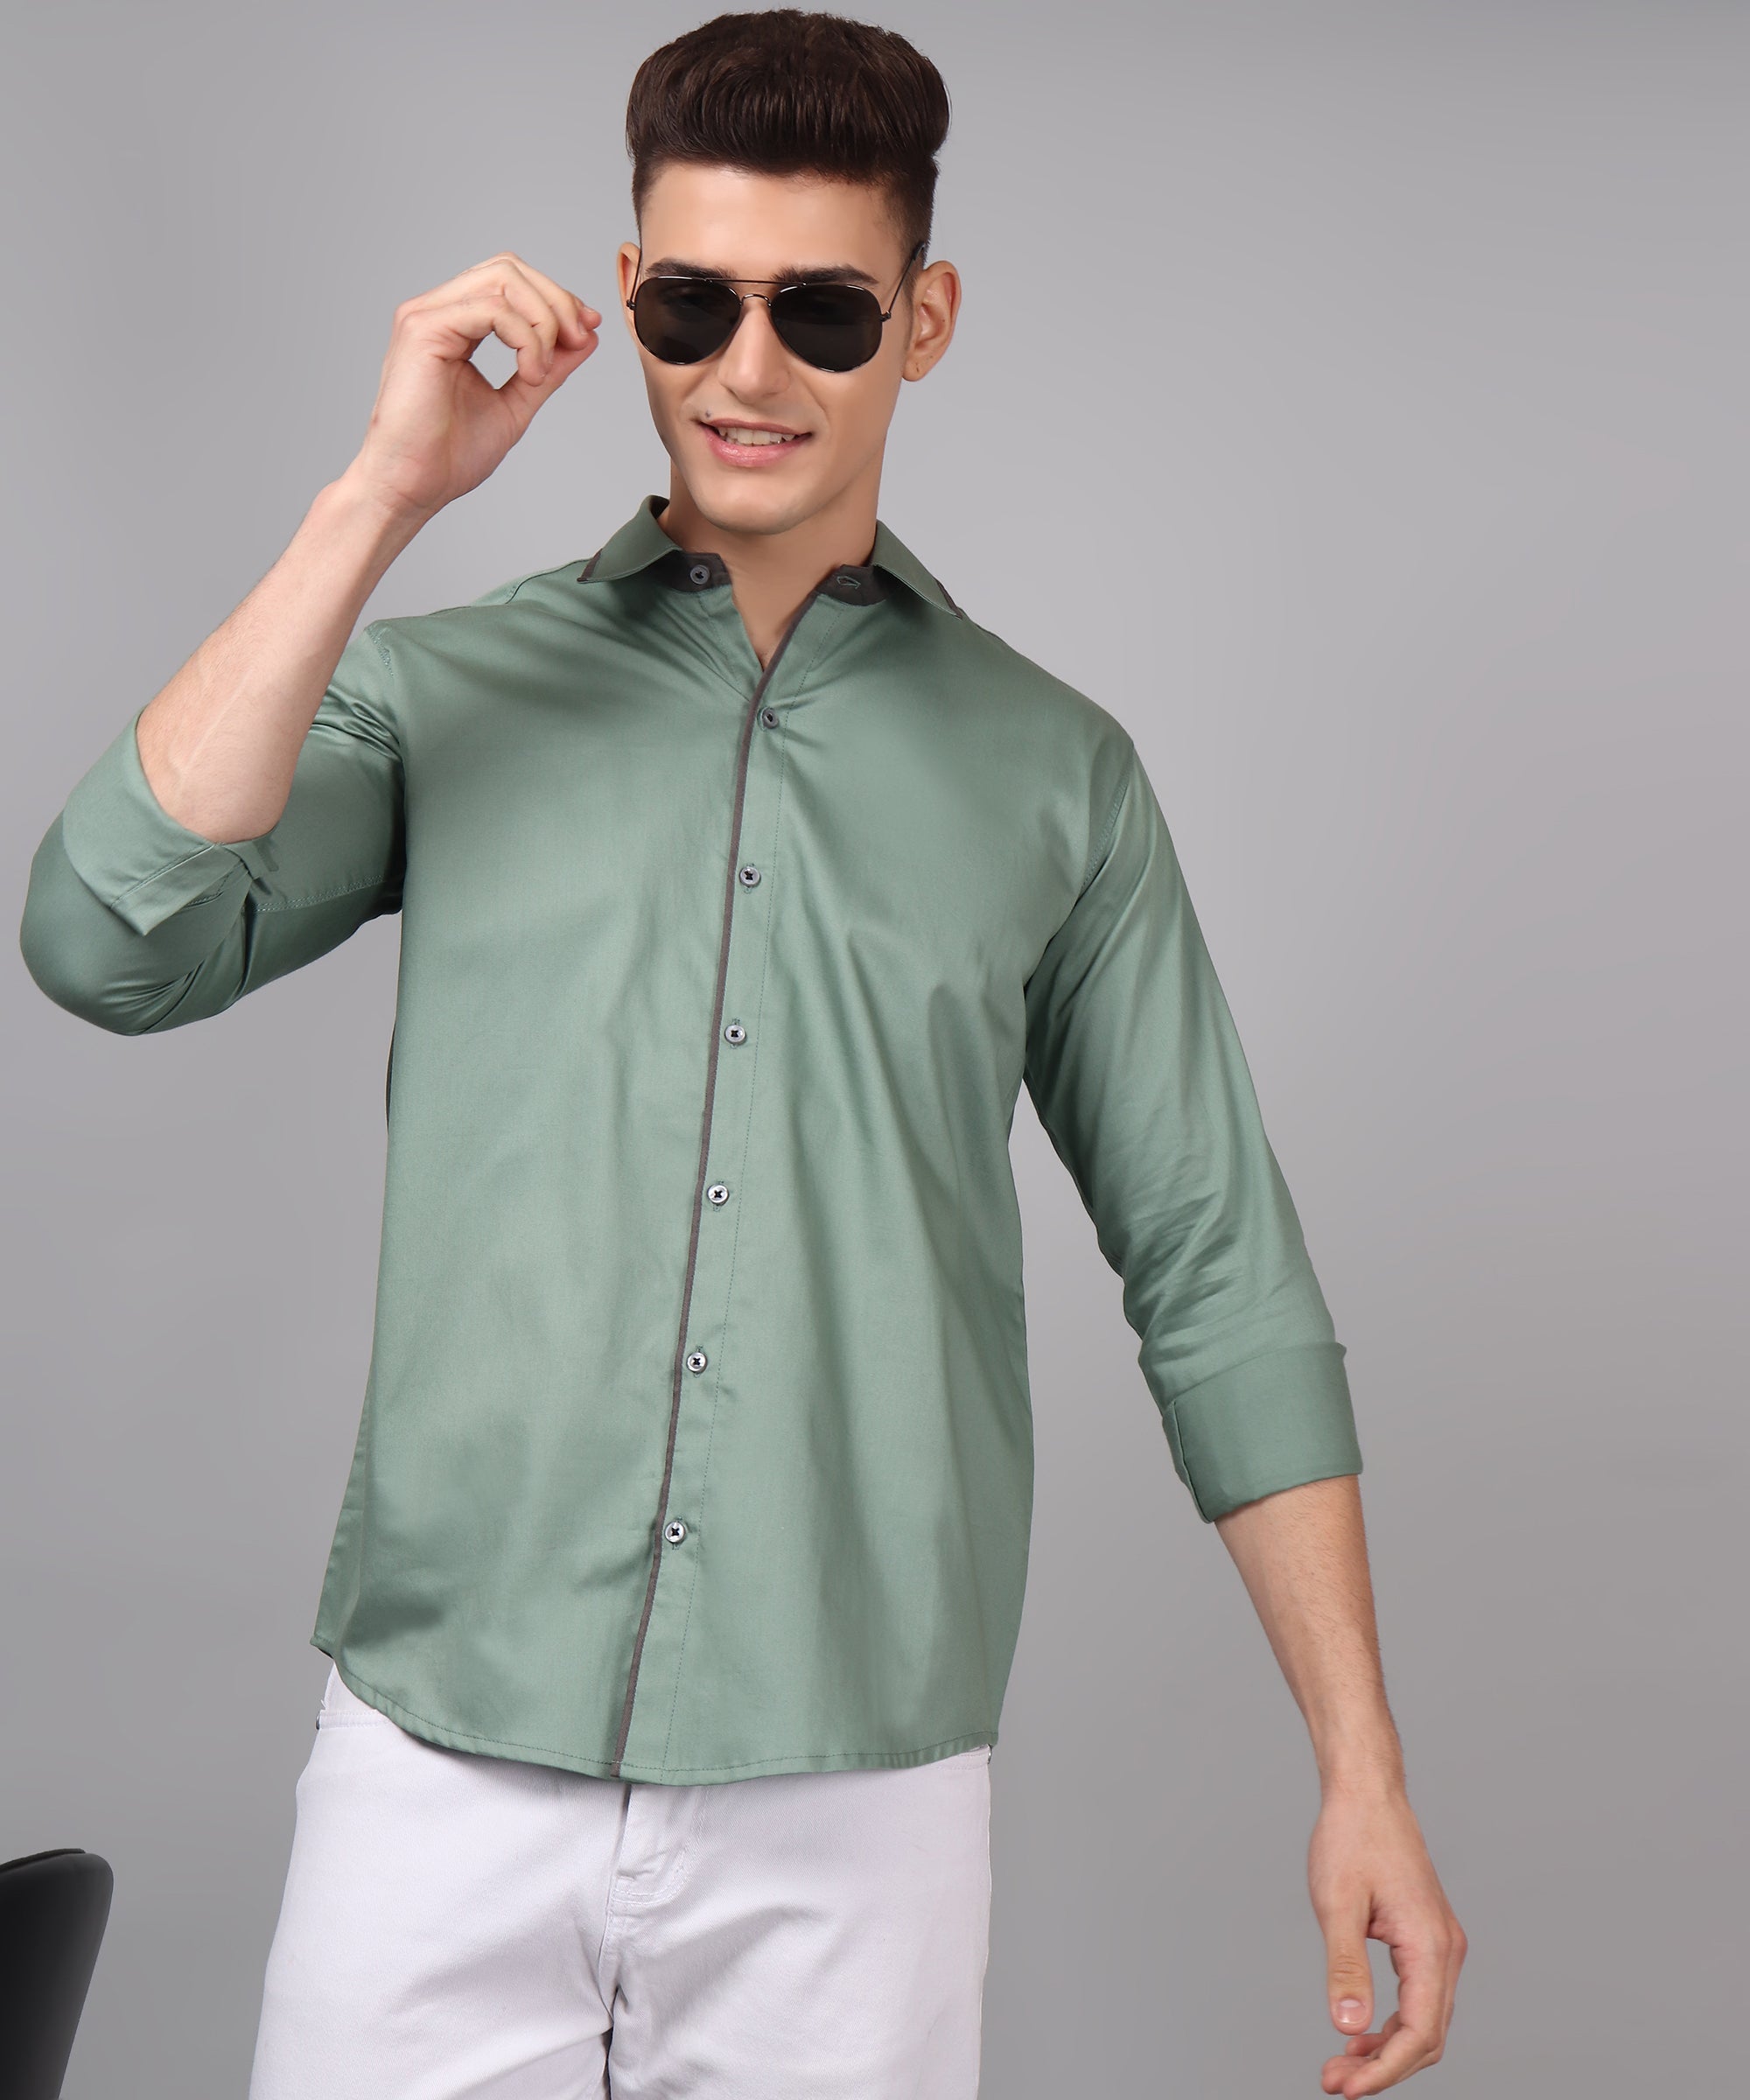 Cotton Elegance: Rediscovering Timeless Sophistication in Classical Cotton Fabric Shirts